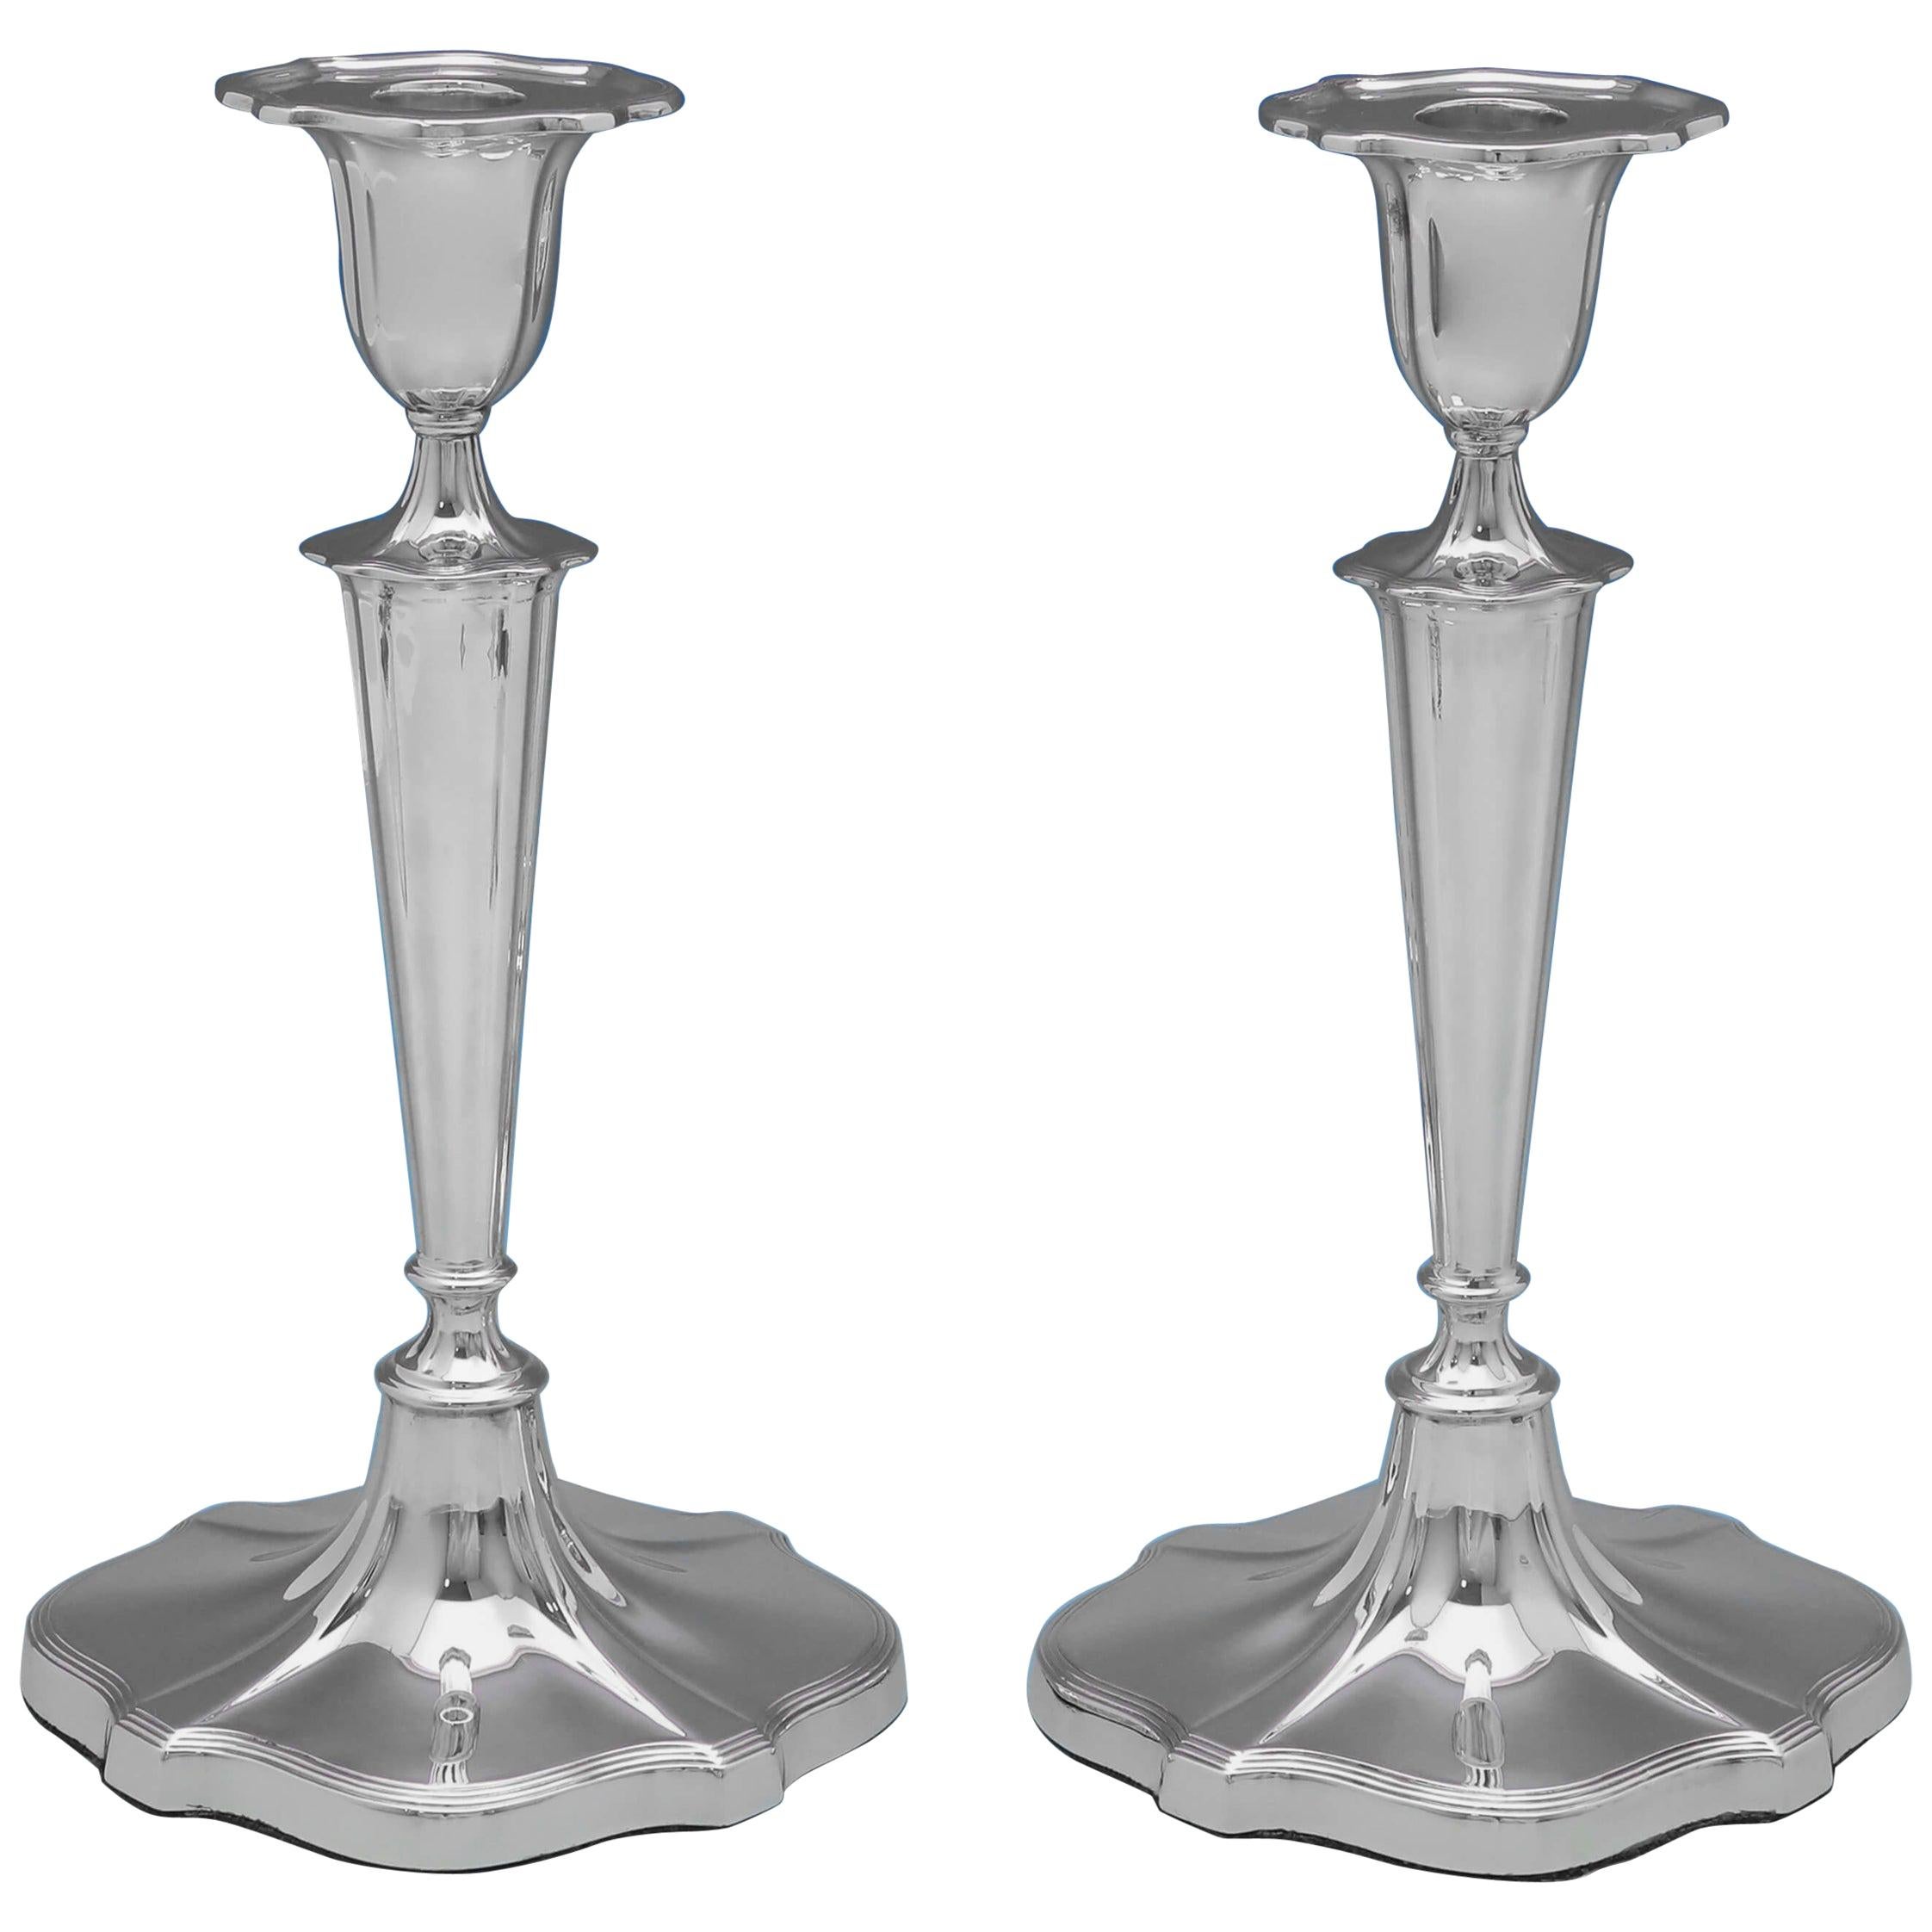 Antique Sterling Silver Pair of Candlesticks by Walker & Hall Sheffield, 1914